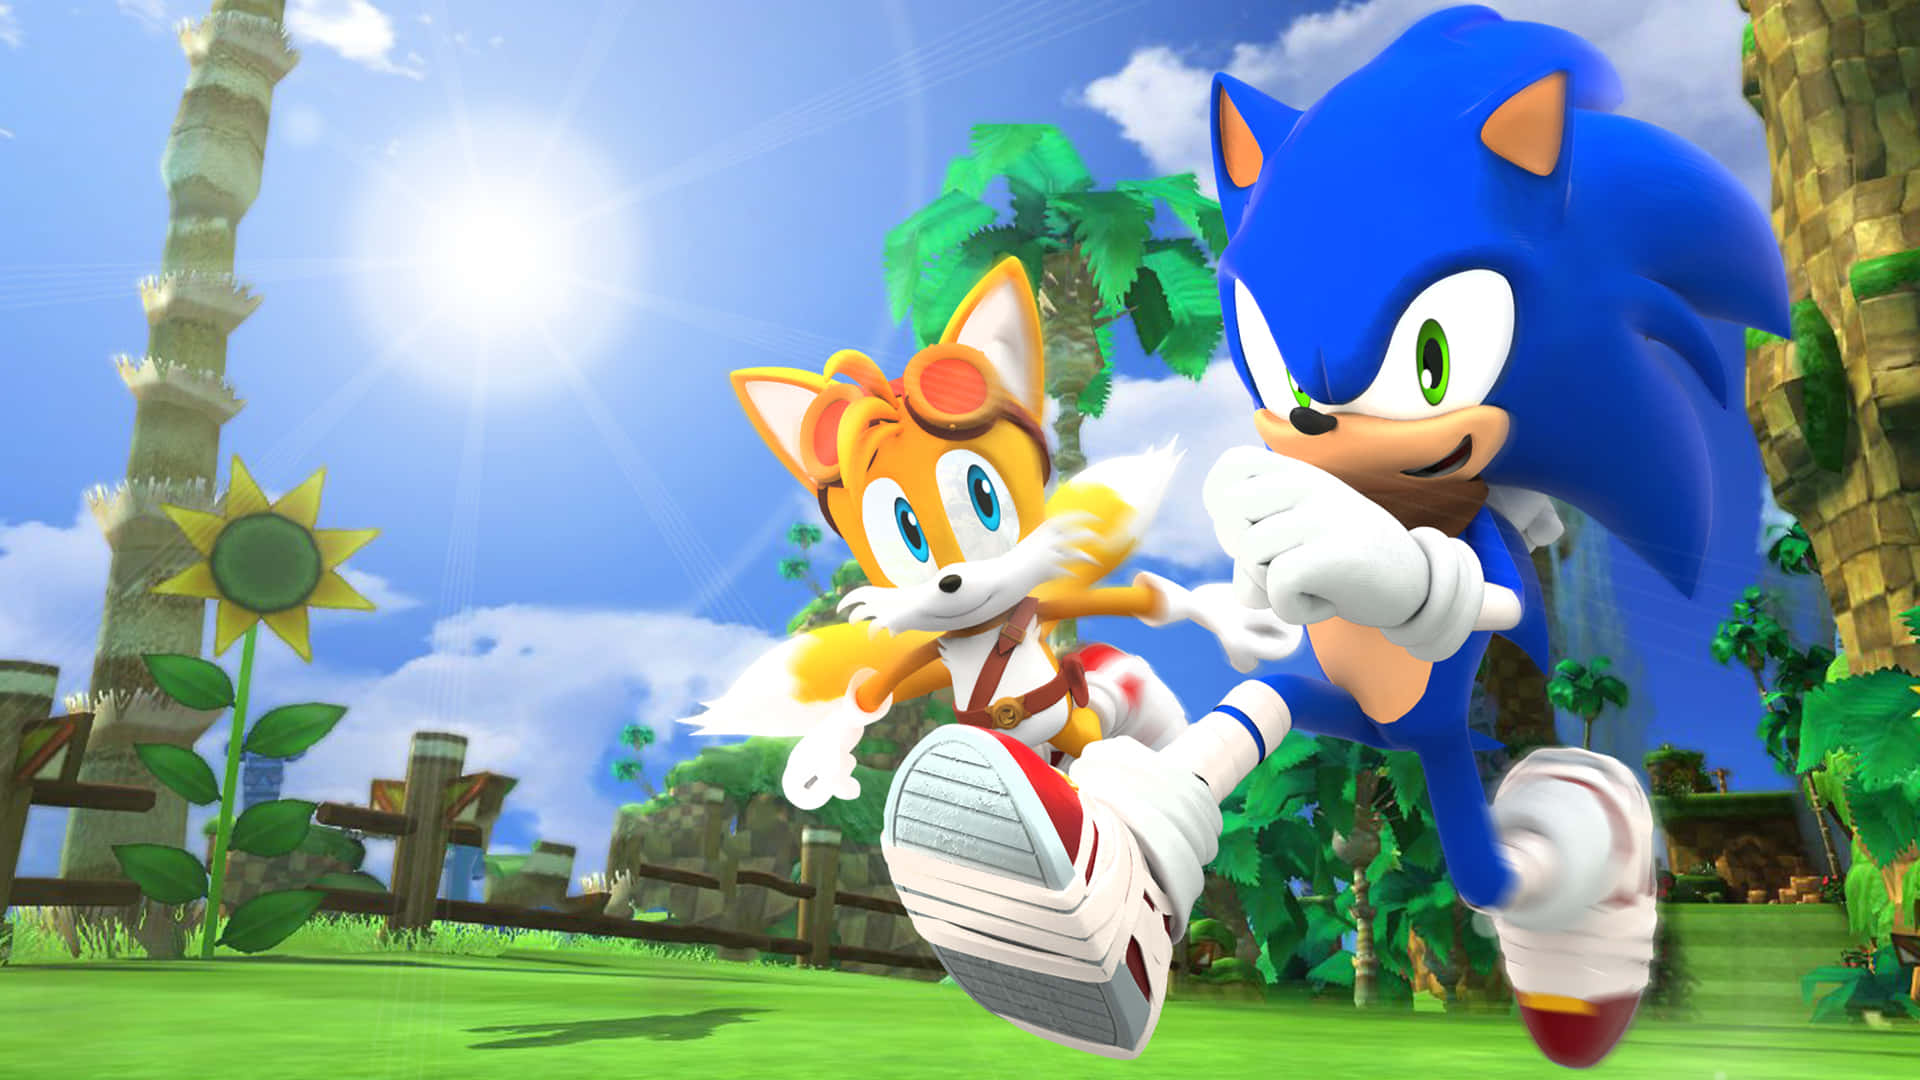 Sonic and Tails - Unbreakable Bond Wallpaper